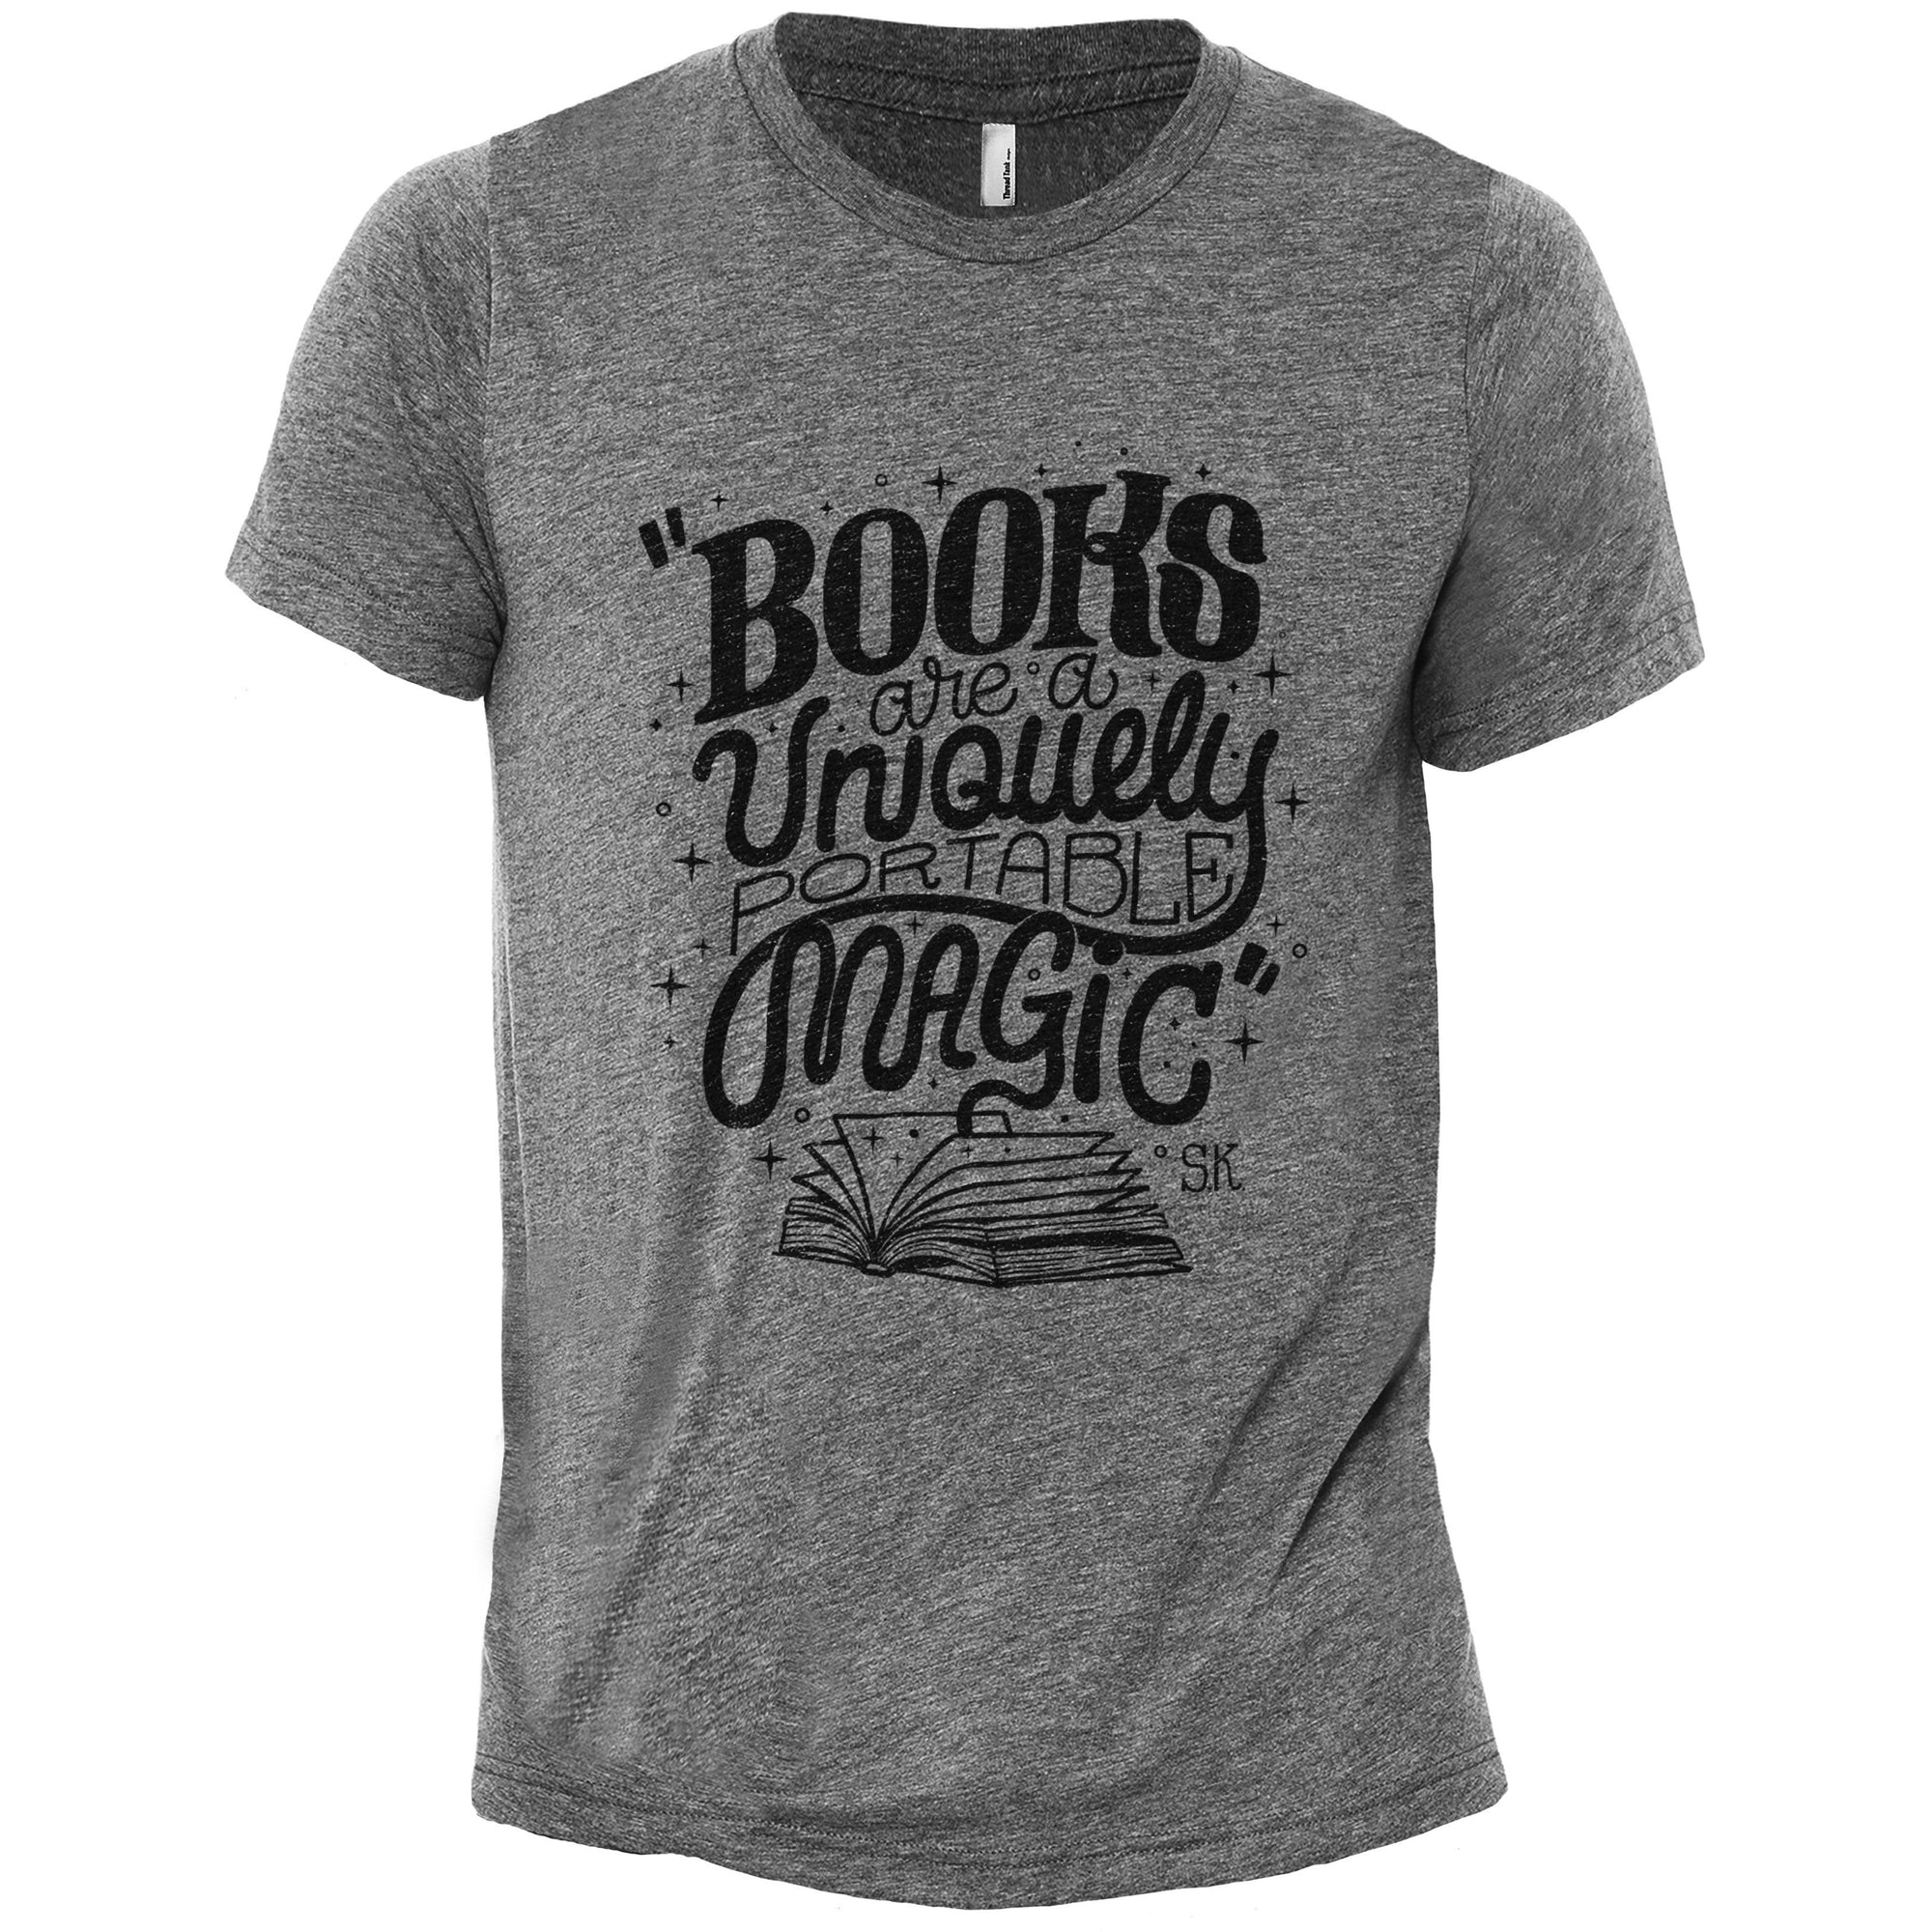 “Books Are A Uniquely Portable Magic.” - S.K. (Reference: Stephen King, A Memoir Of The Craft) - threadtank | stories you can wear